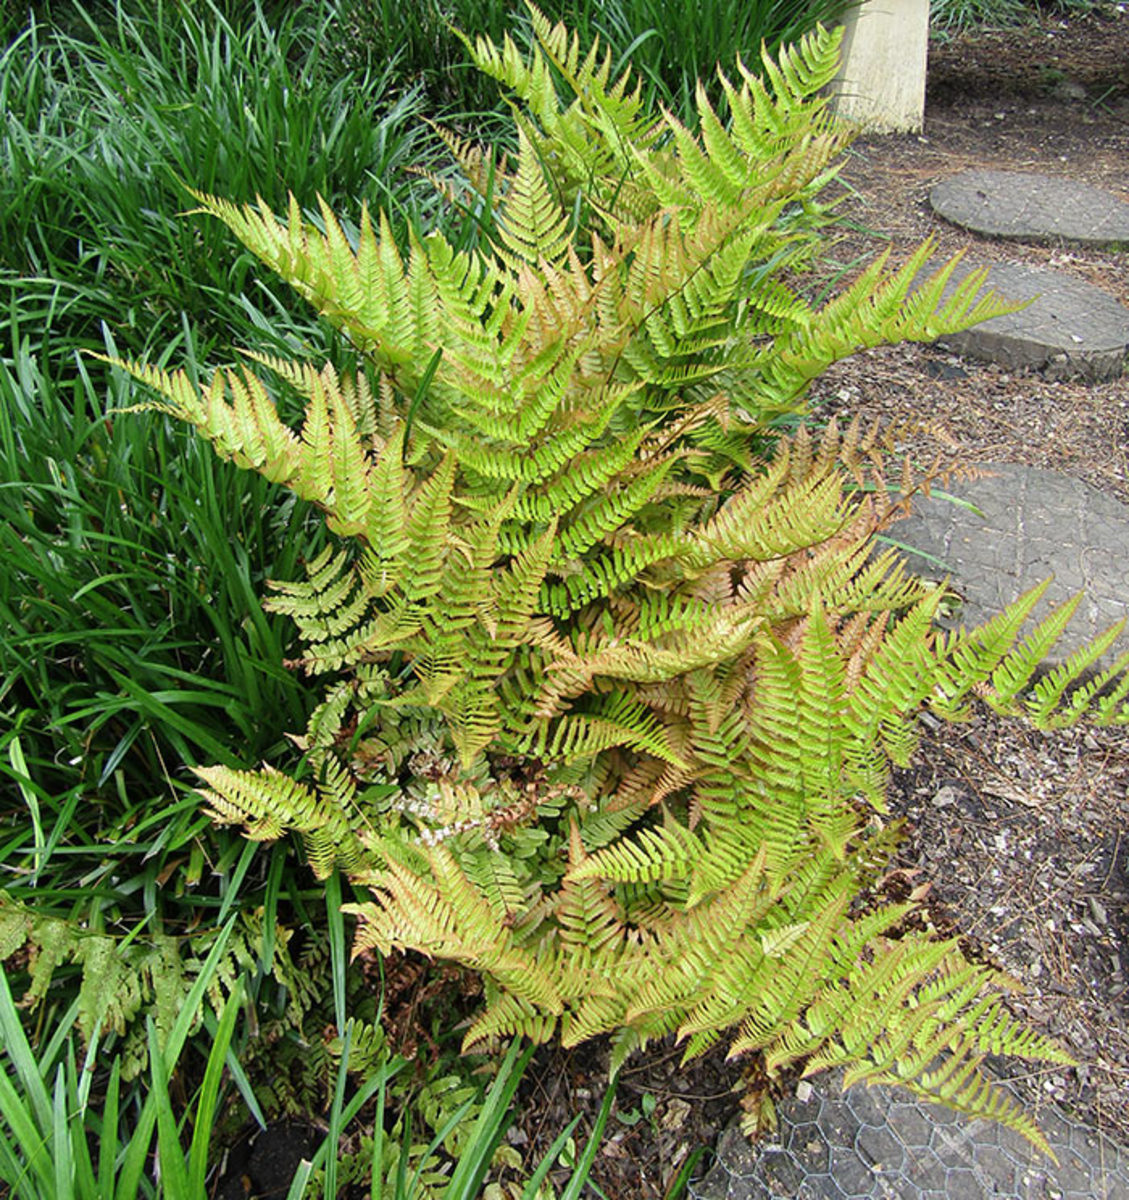 Eye-catching autumn fern finds its appeal in its striking foliage.